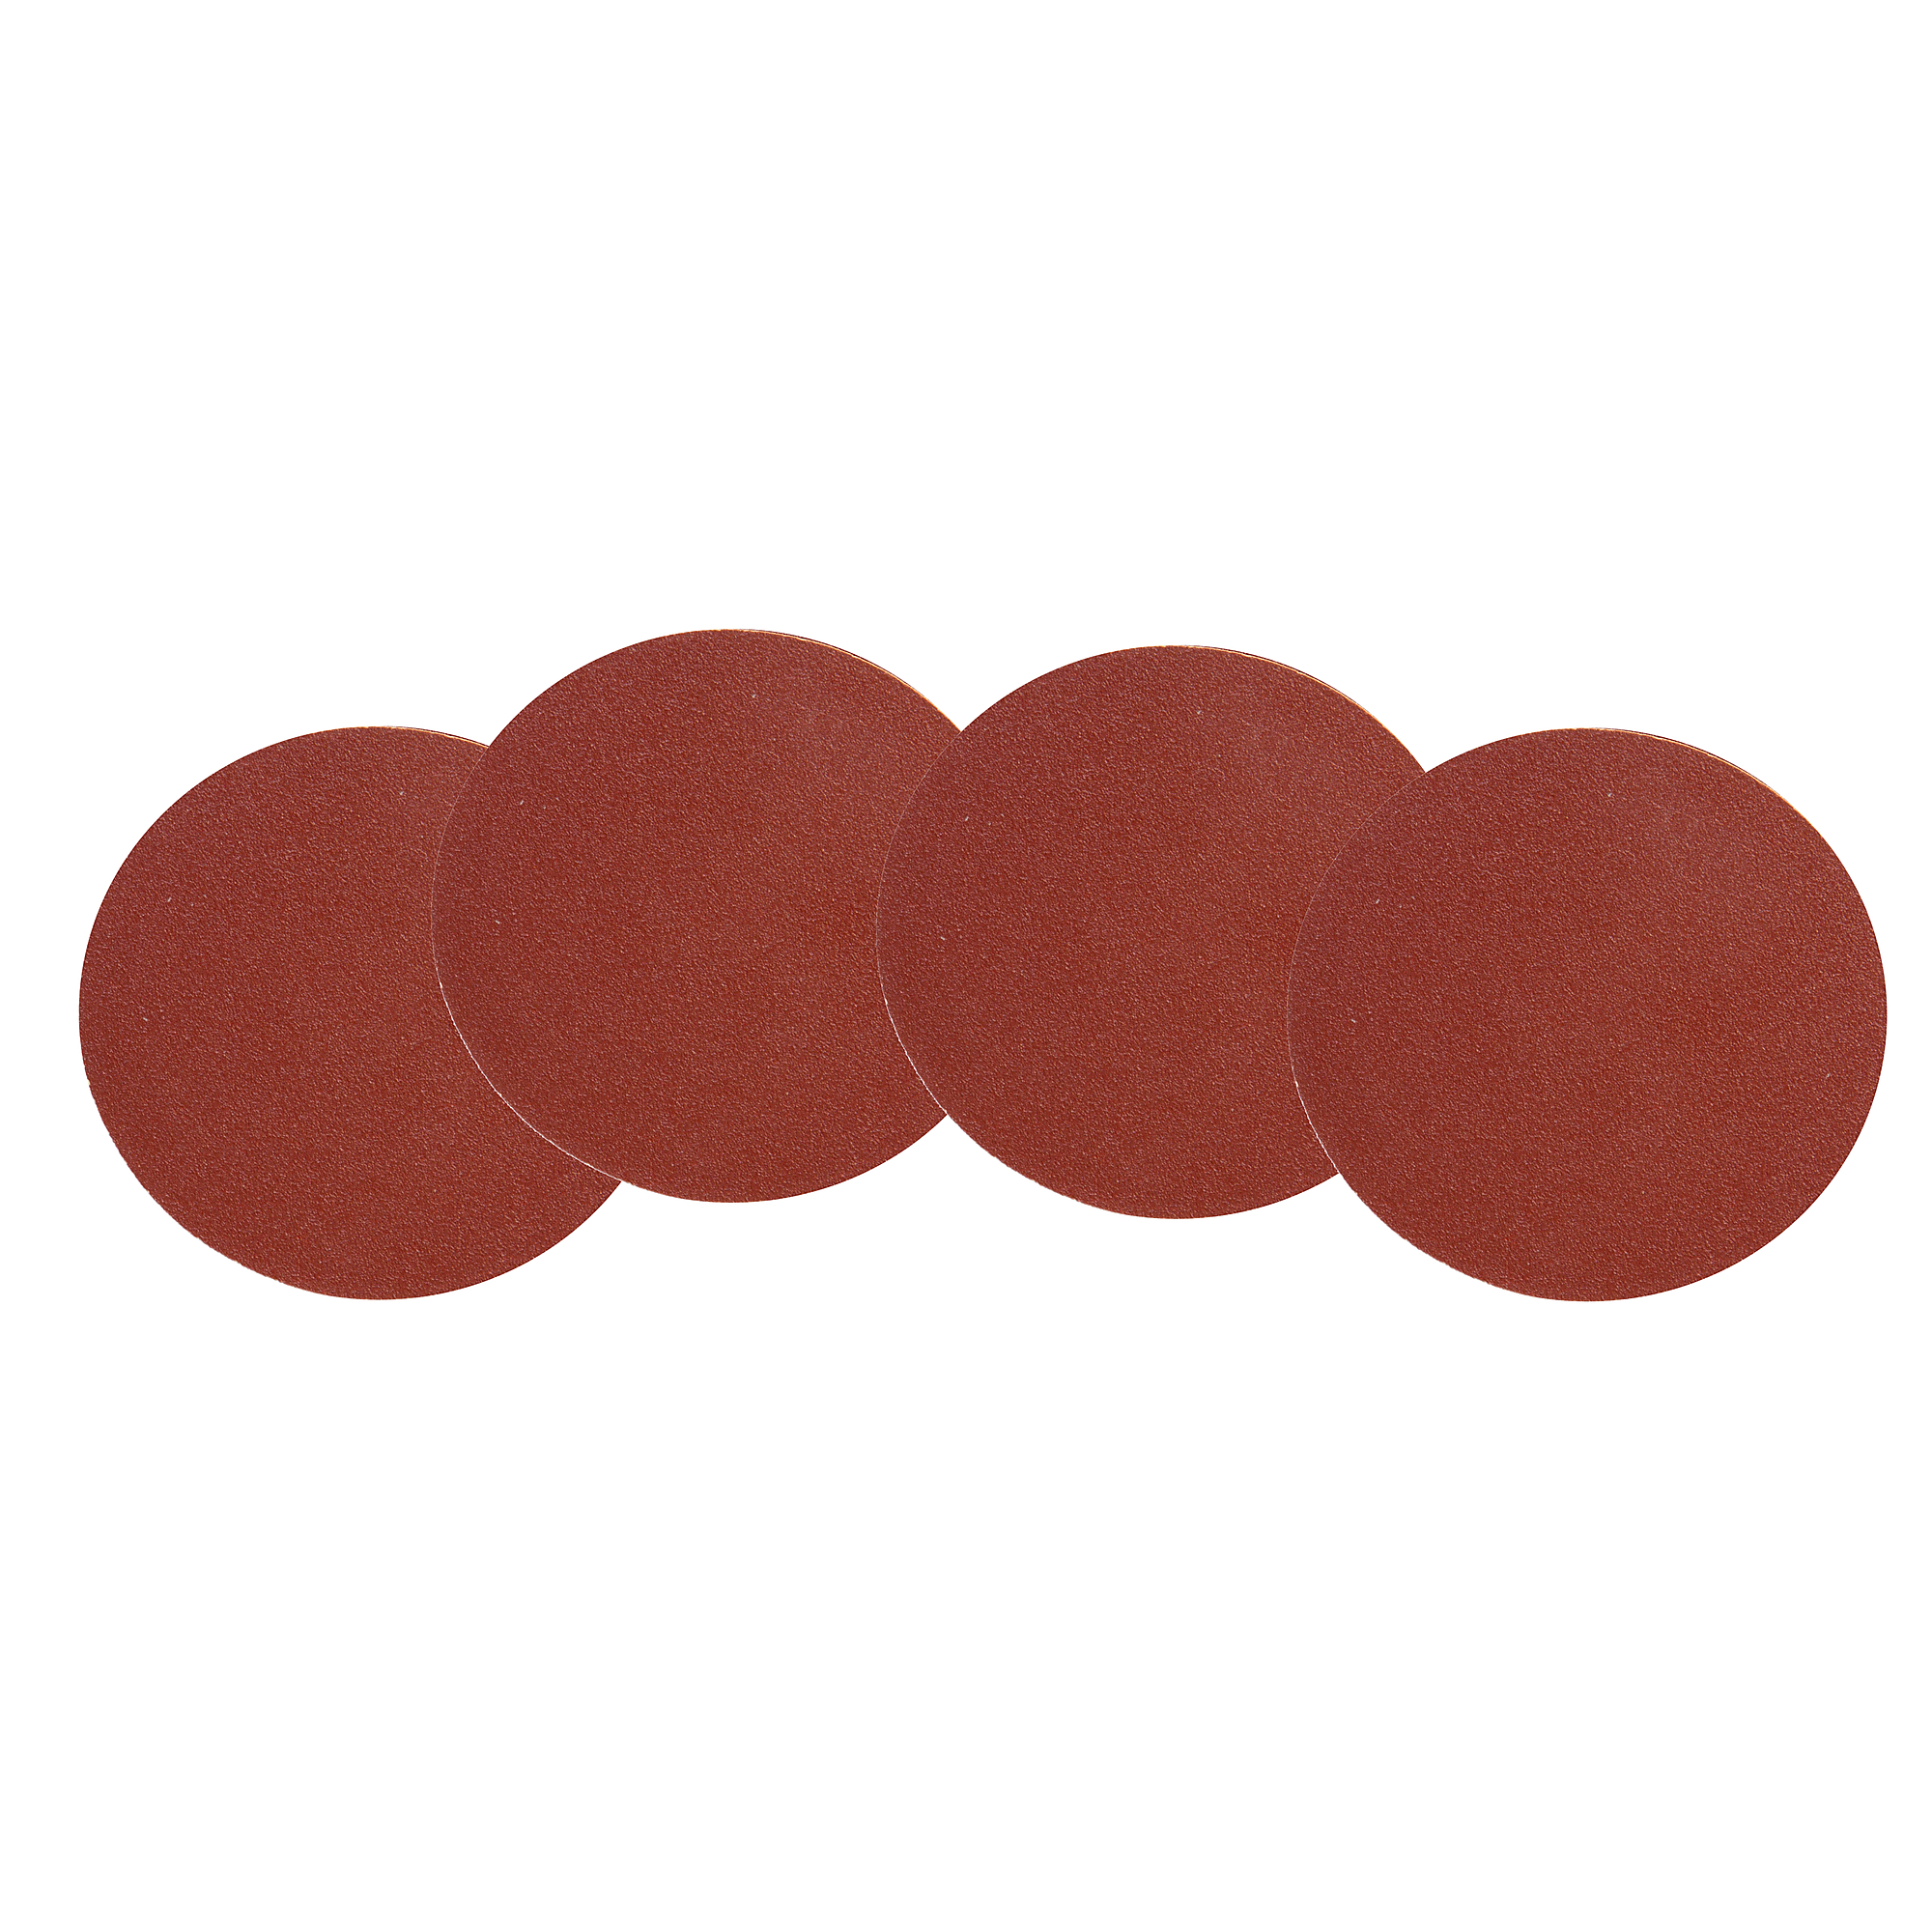 WEN, 4 12Inch 40-Grit Adhesive-Backed Disc Sandpaper, Pieces (qty.) 4 Grit 40 Model 12SD40